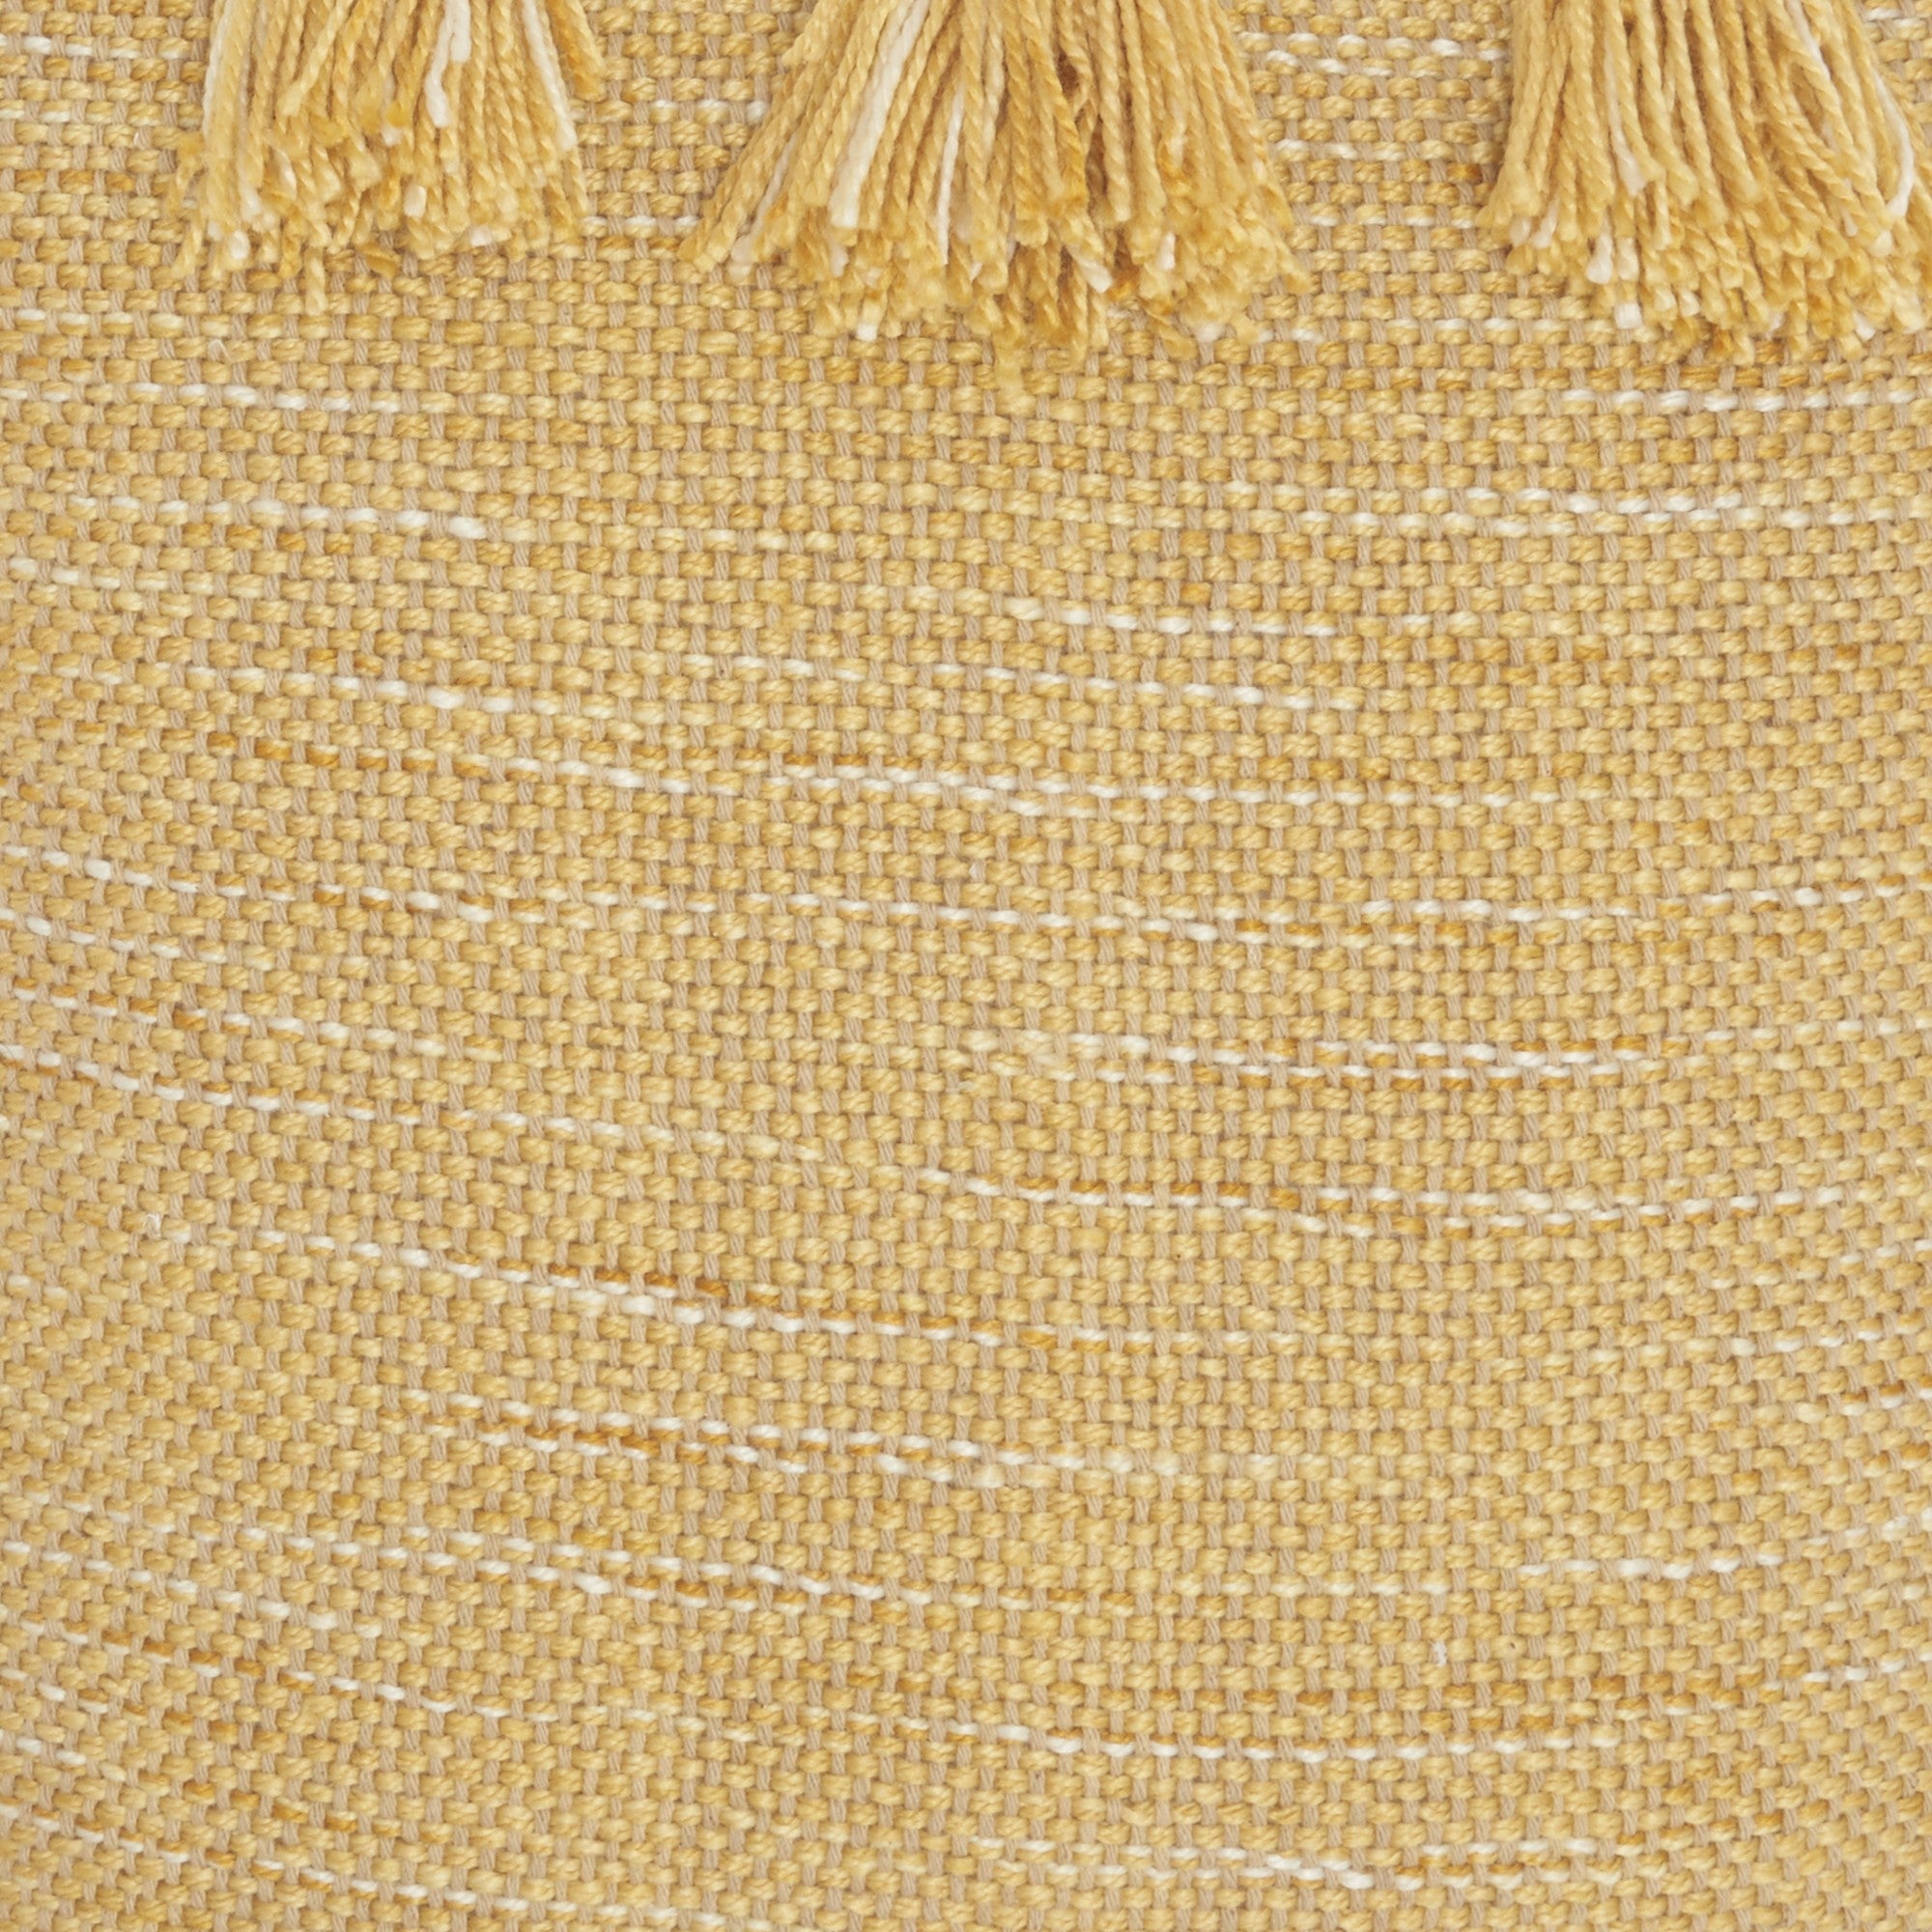 13" X 33" Yellow Polyester Blend Throw Pillow With Tassels